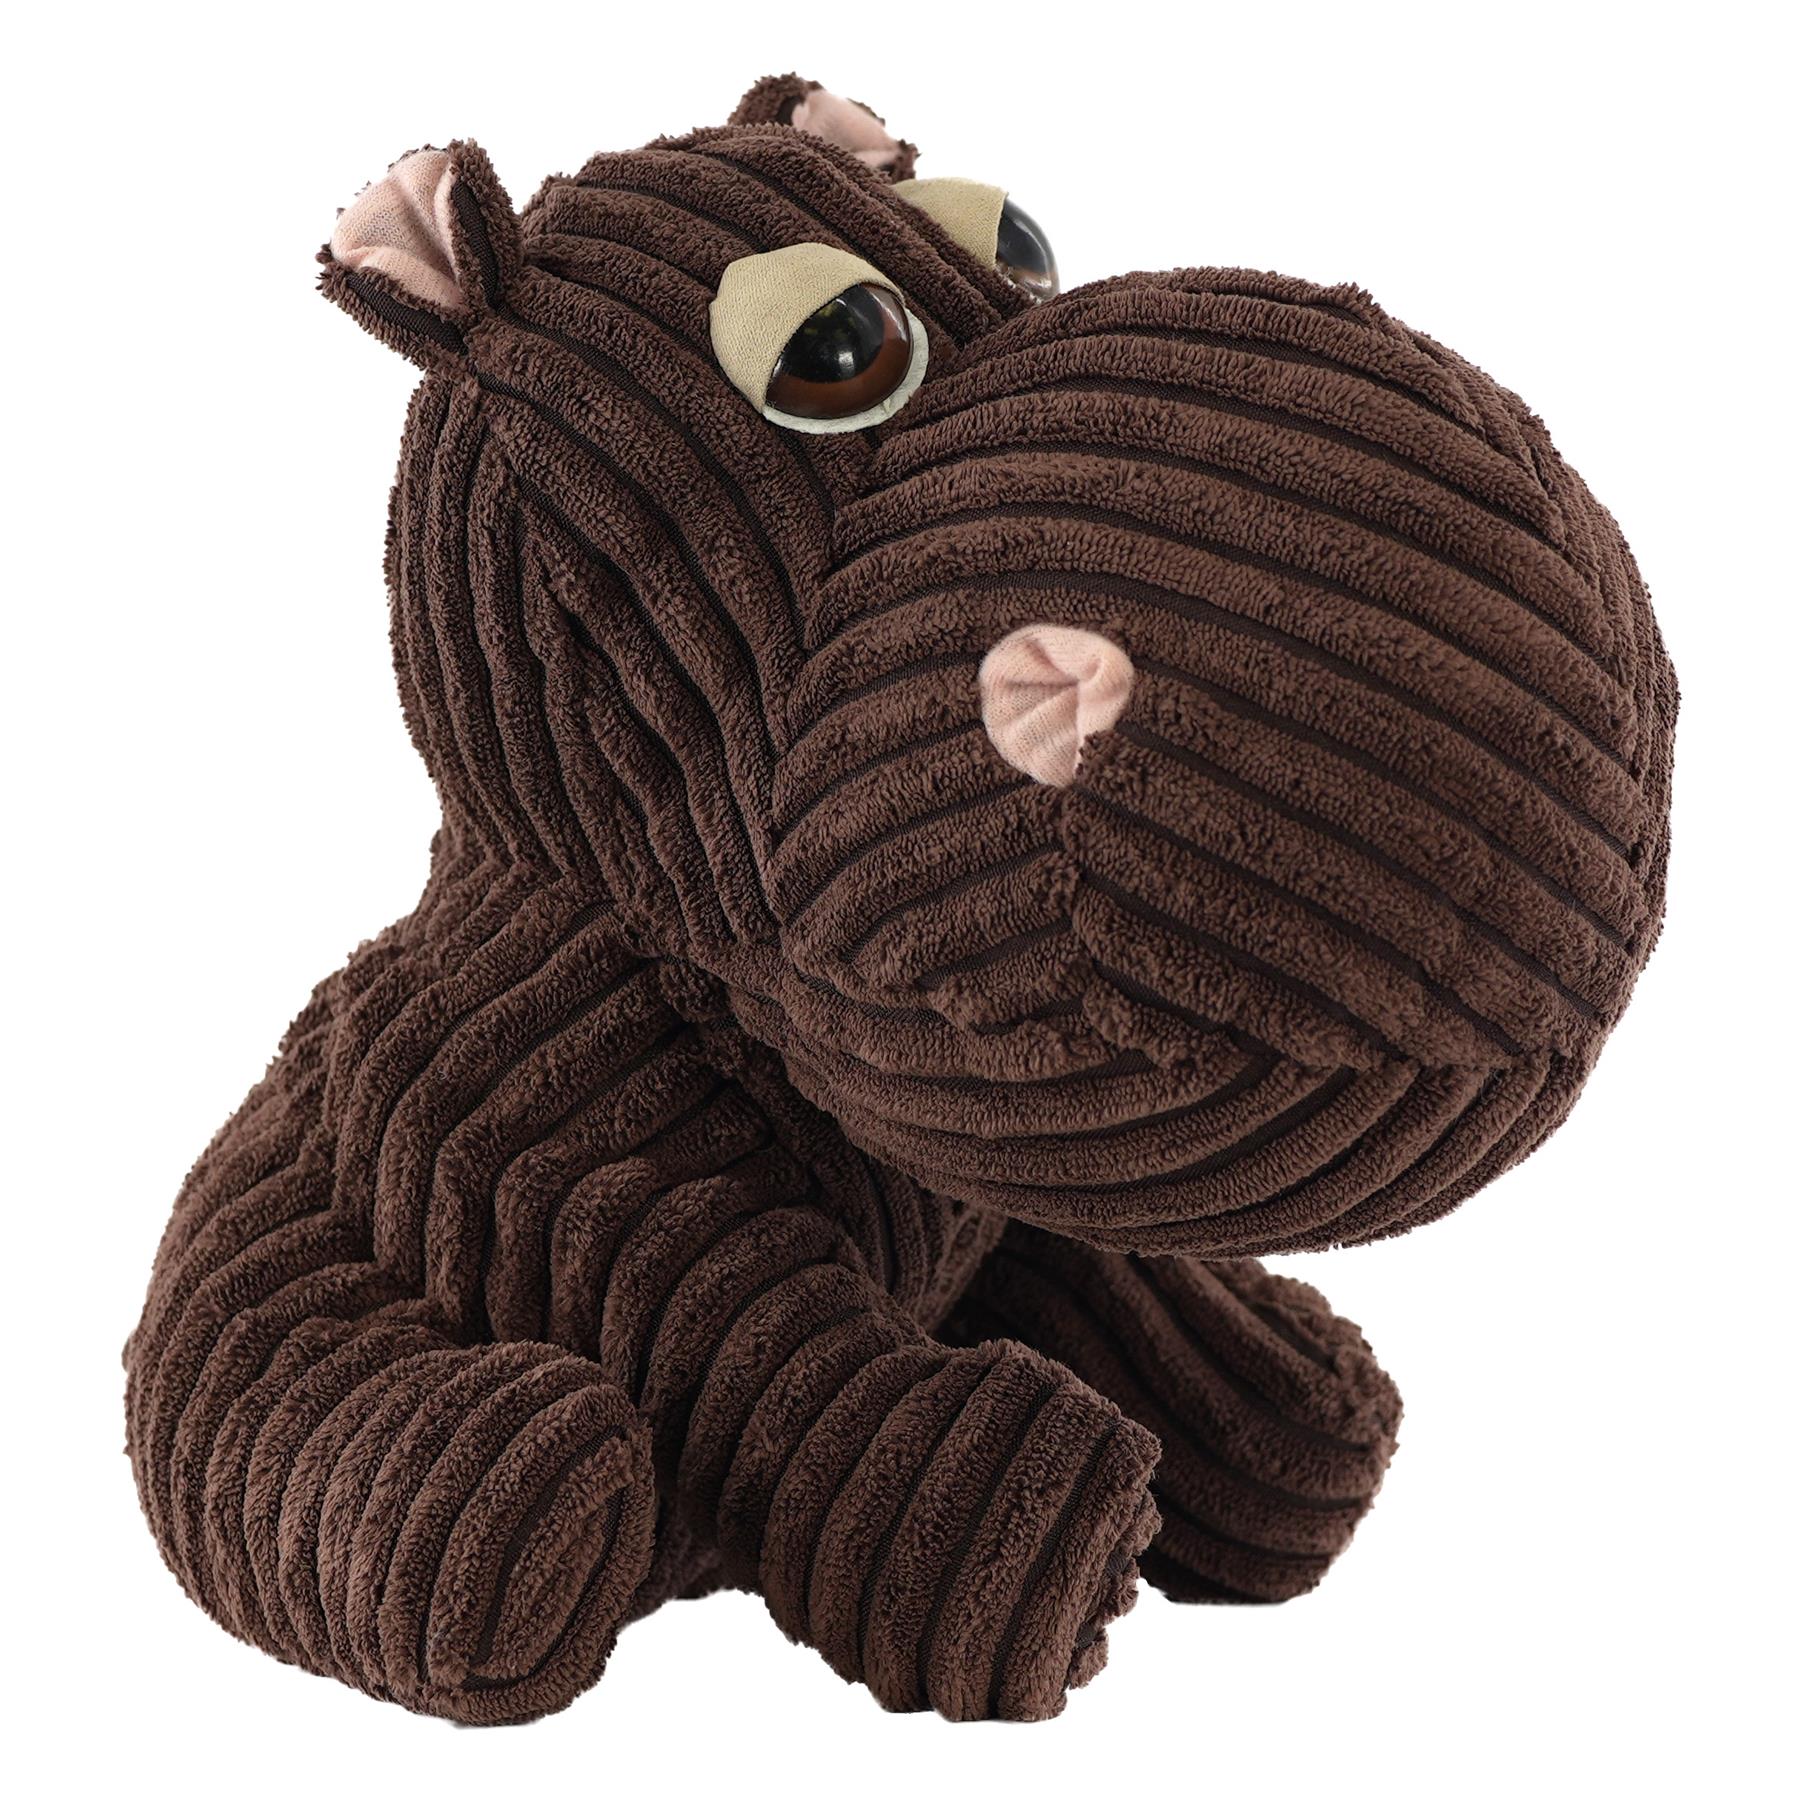 Hippo Novelty Door Stopper by The Magic Toy Shop - UKBuyZone